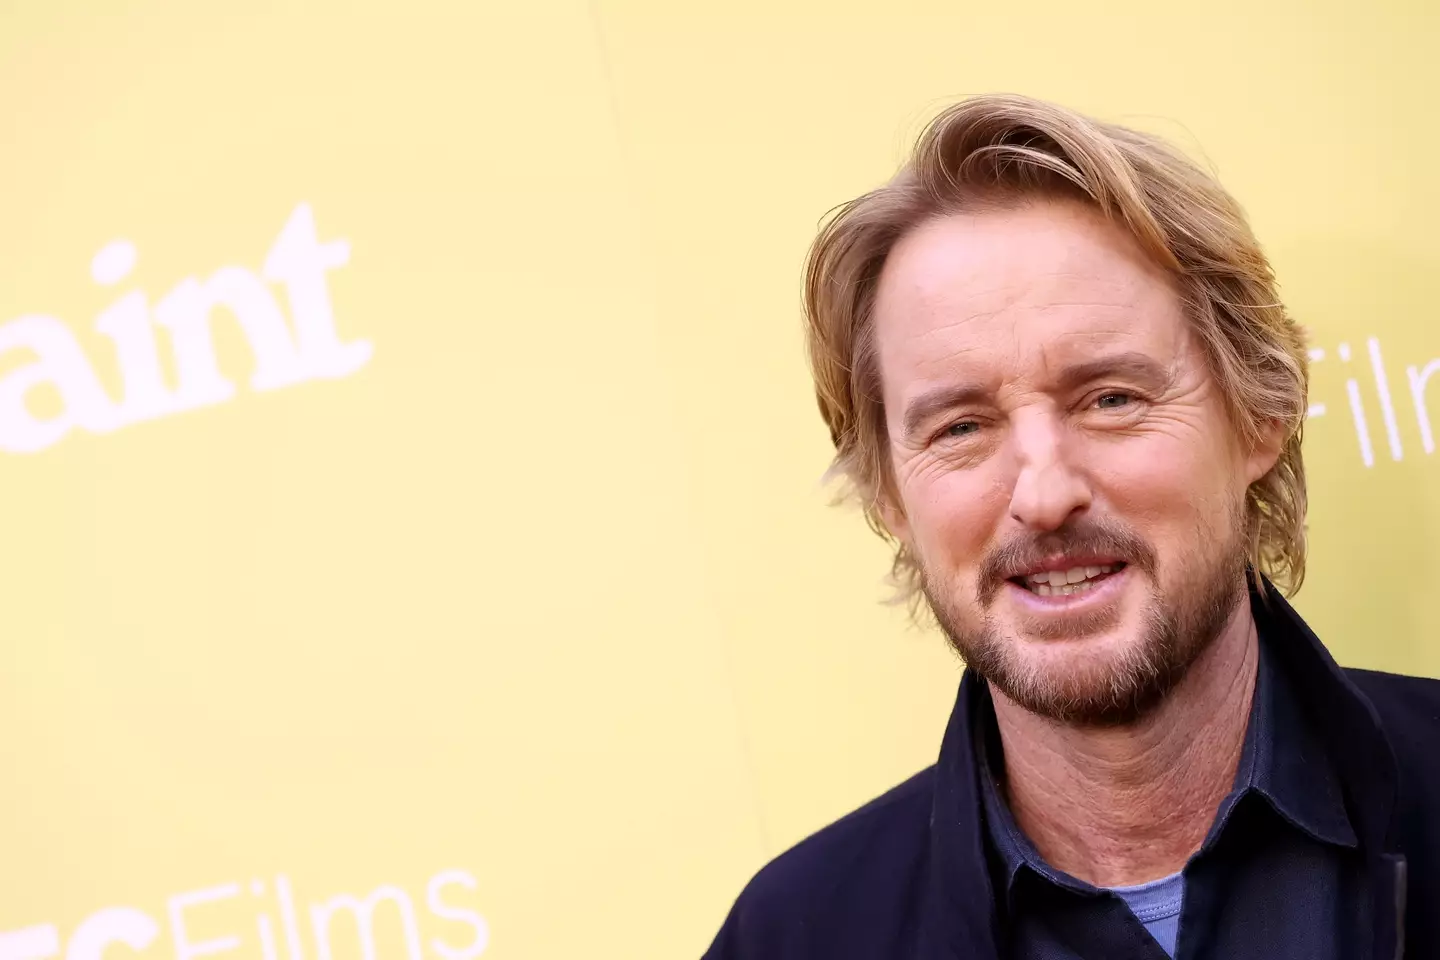 It turns out you can make quite the career from saying 'wow' a lot, at least if you're Owen Wilson.